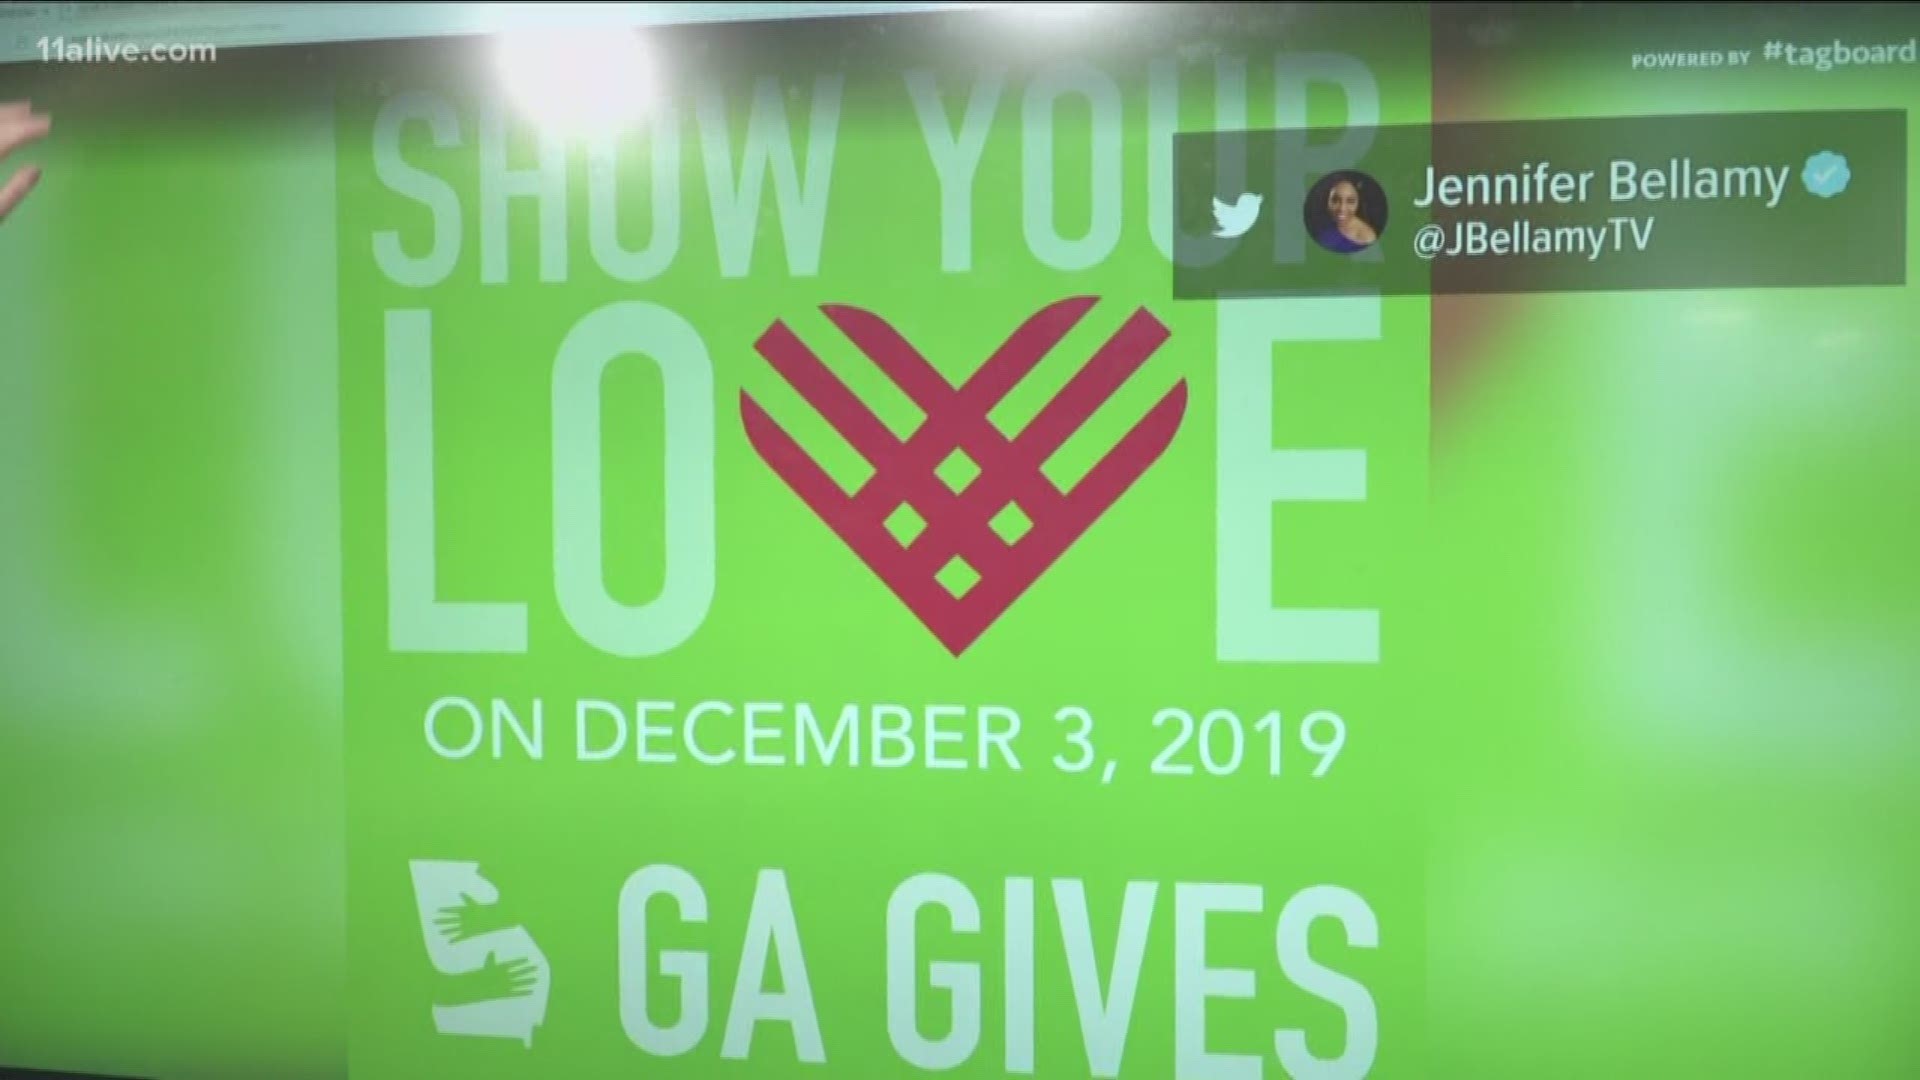 Today is the biggest giving day of the year in Georgia.